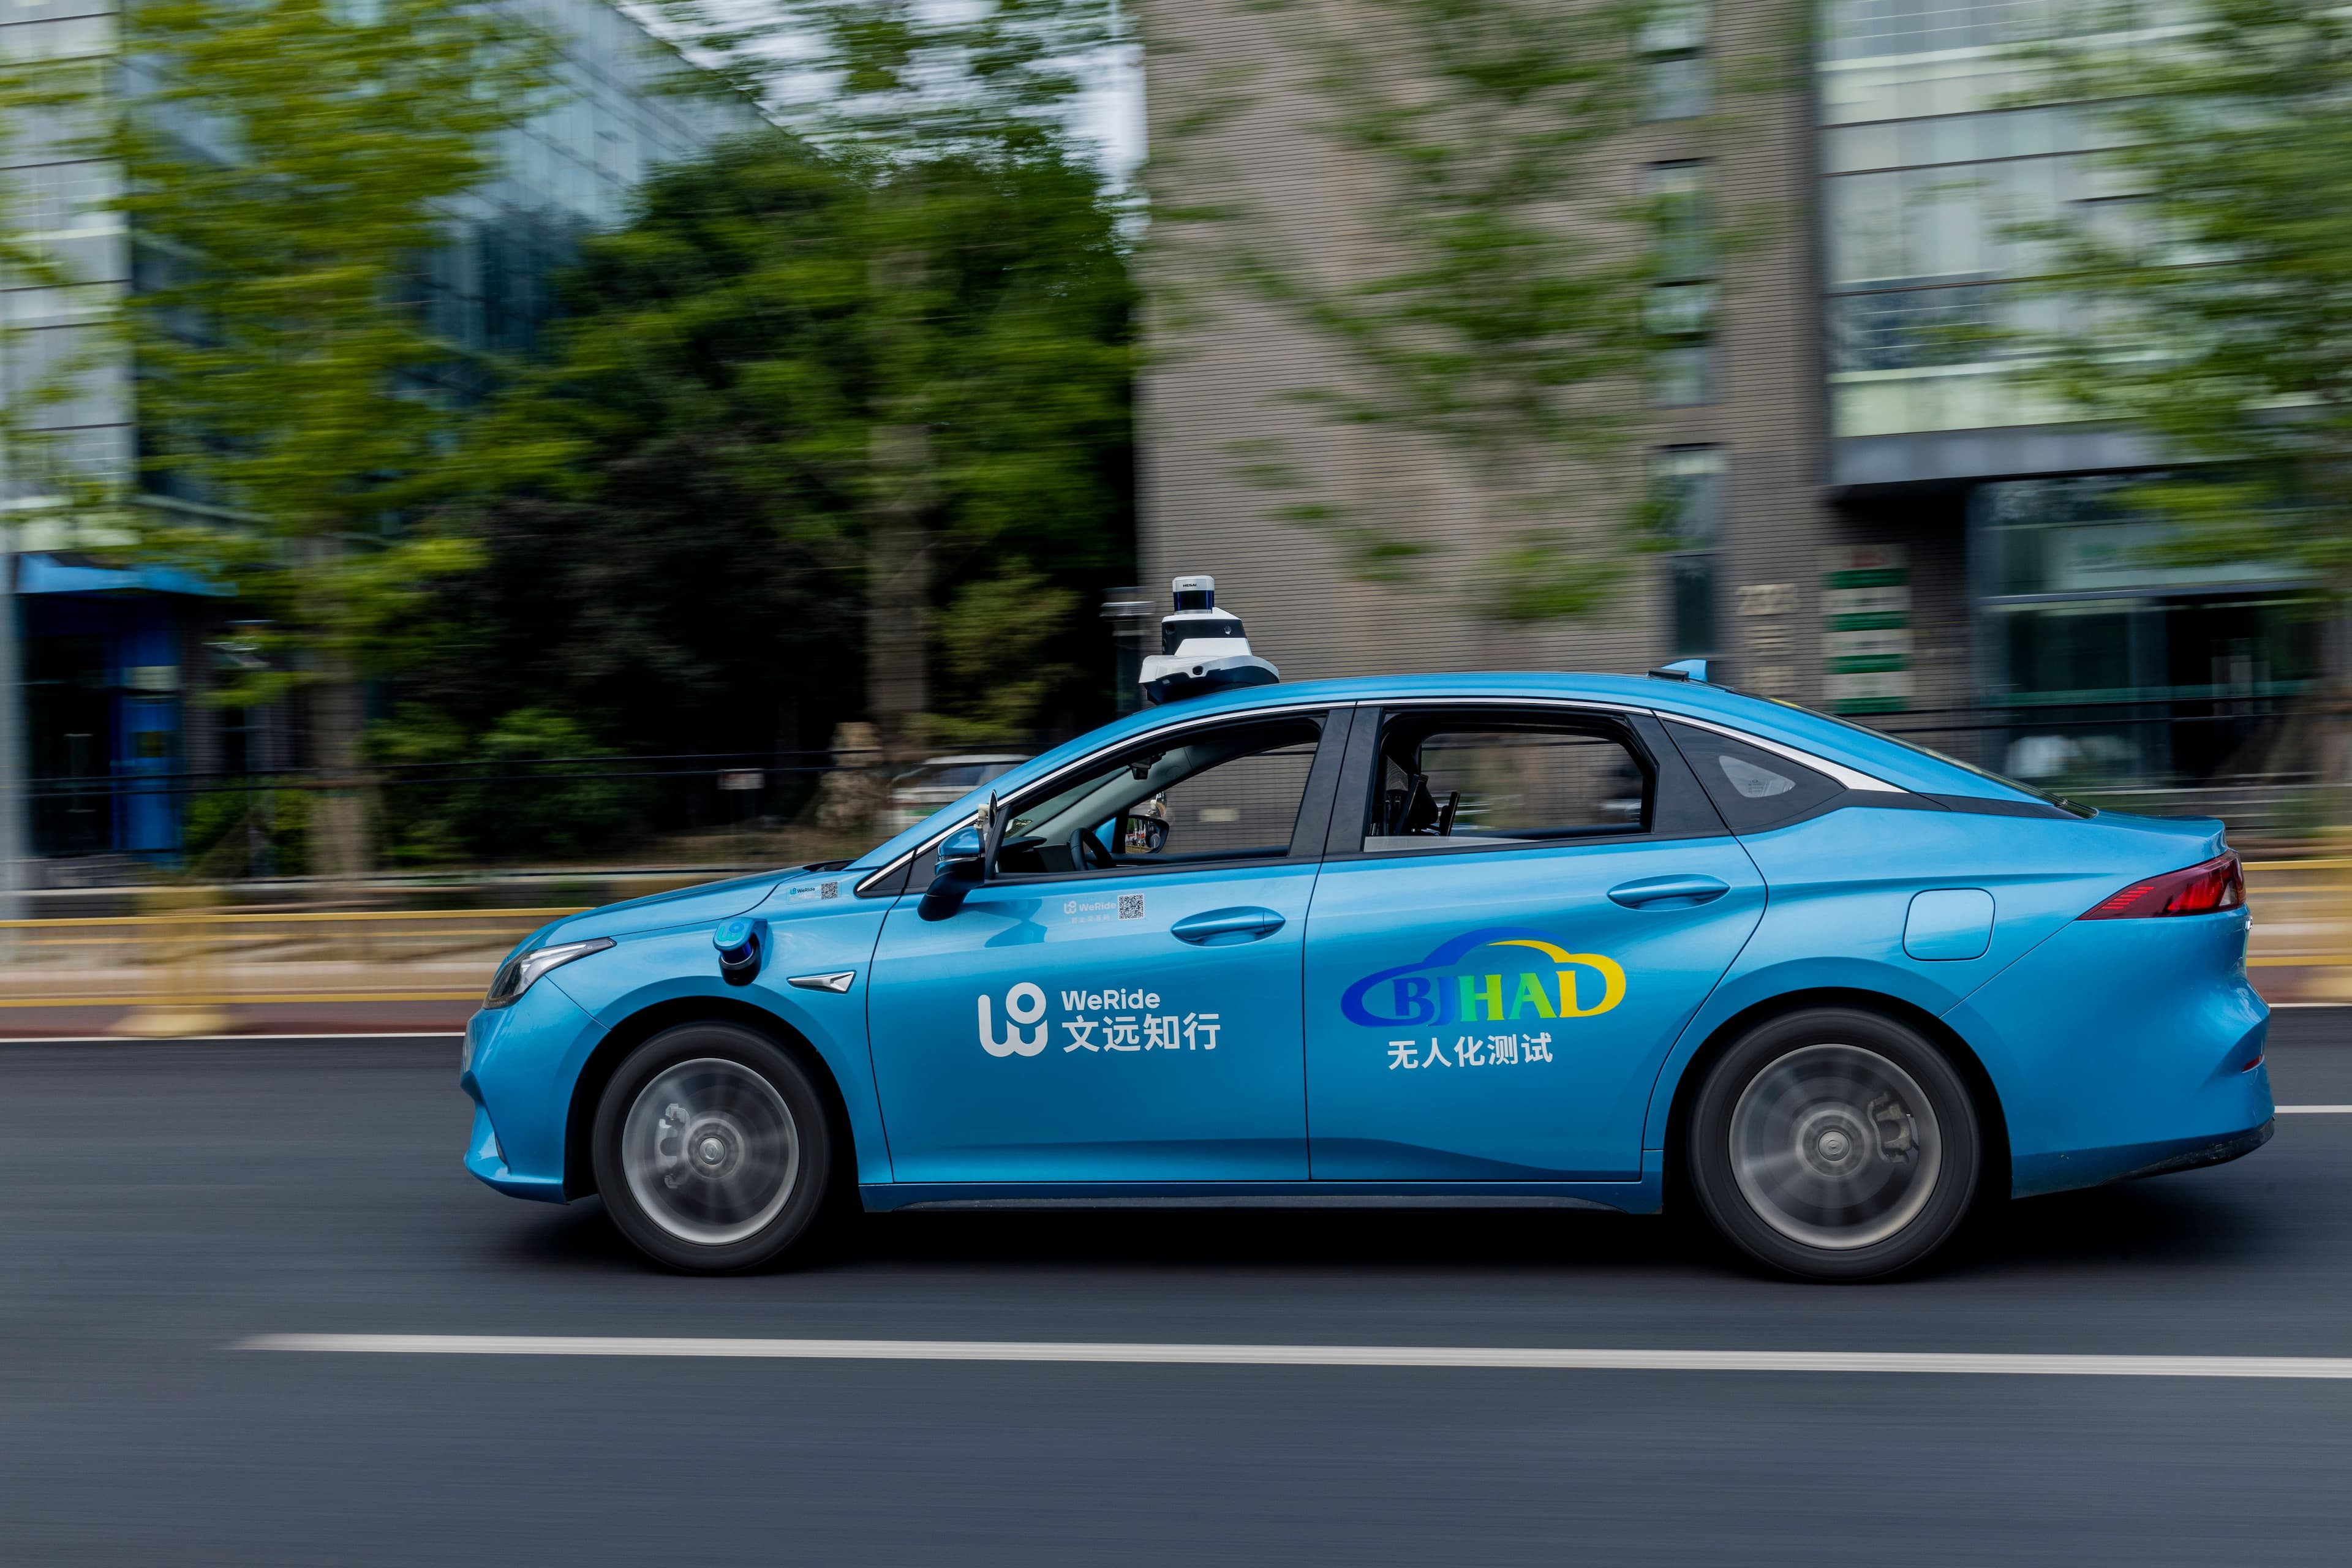 Another major milestone! WeRide gets approval to operate fully driverless Robotaxi in Beijing 